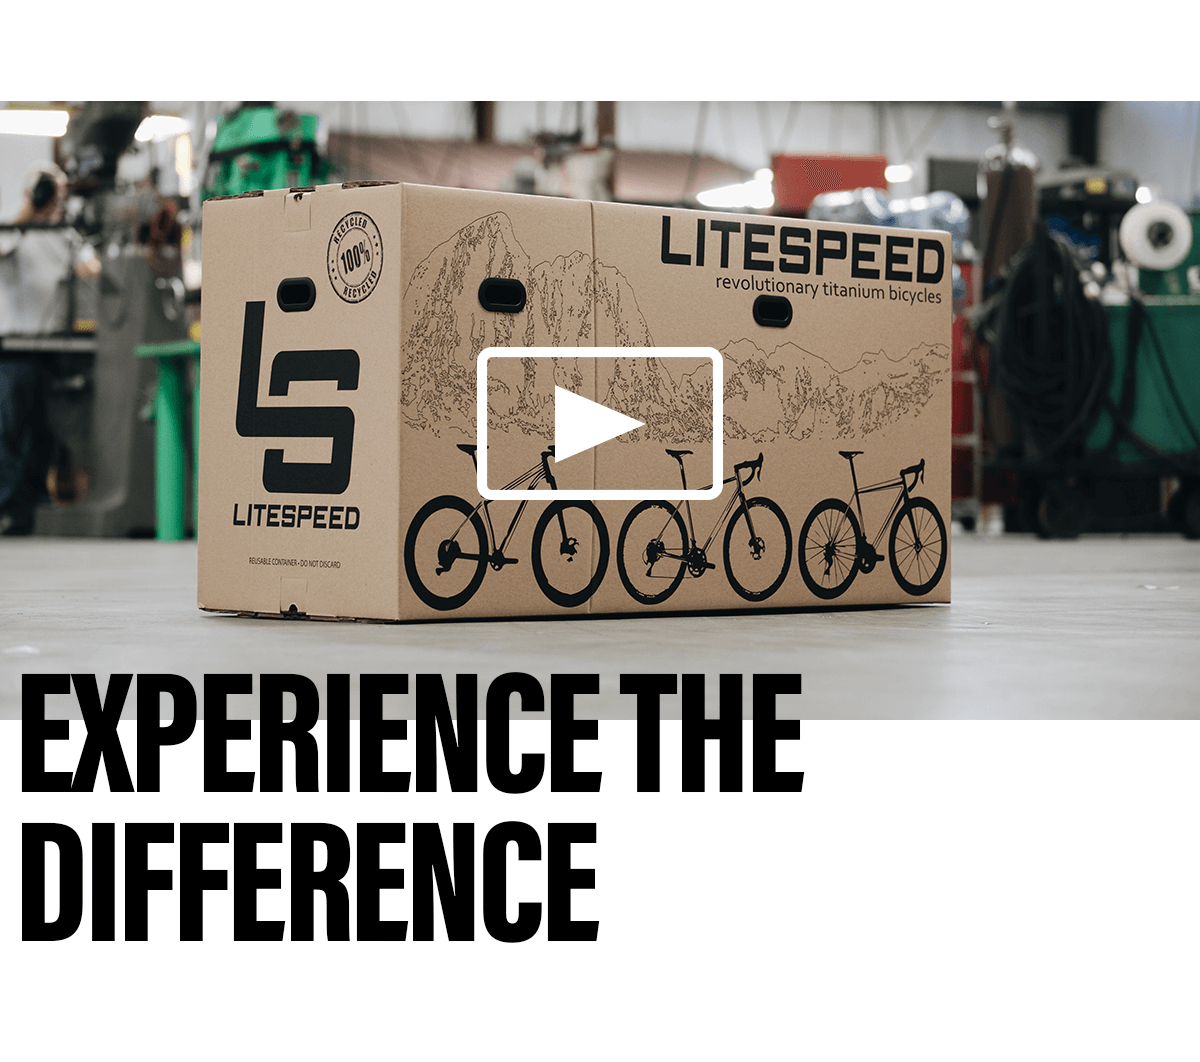 Made in the USA. Shipped assembled. All Litespeed bikes are handbuilt in Tennessee and shipped to your door, fully assembled.